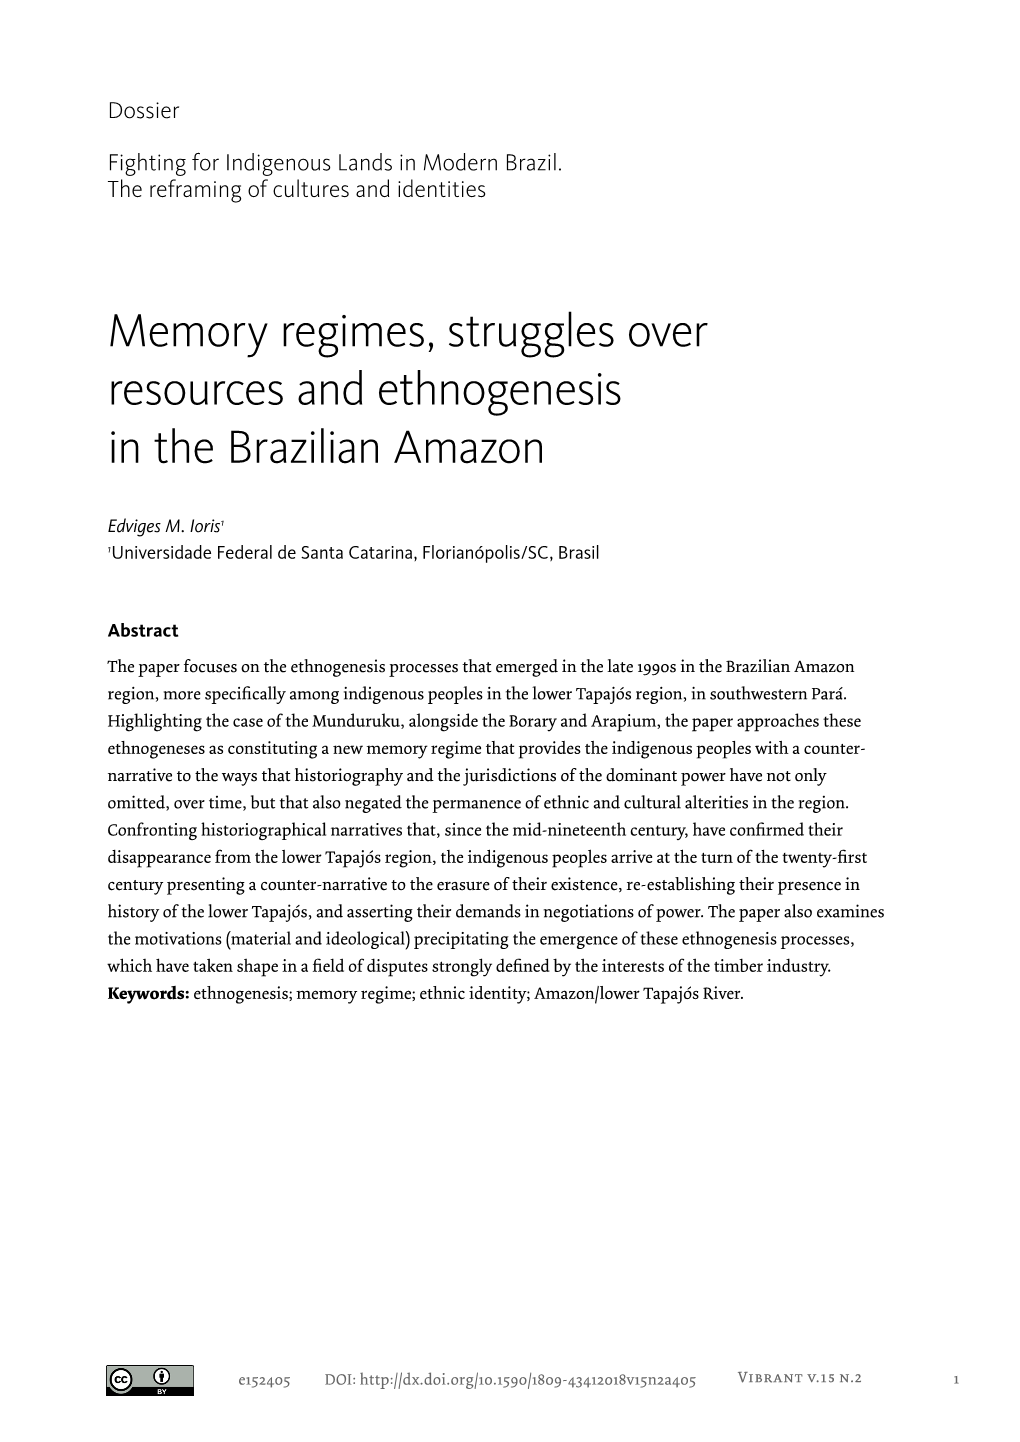 Memory Regimes, Struggles Over Resources and Ethnogenesis in the Brazilian Amazon